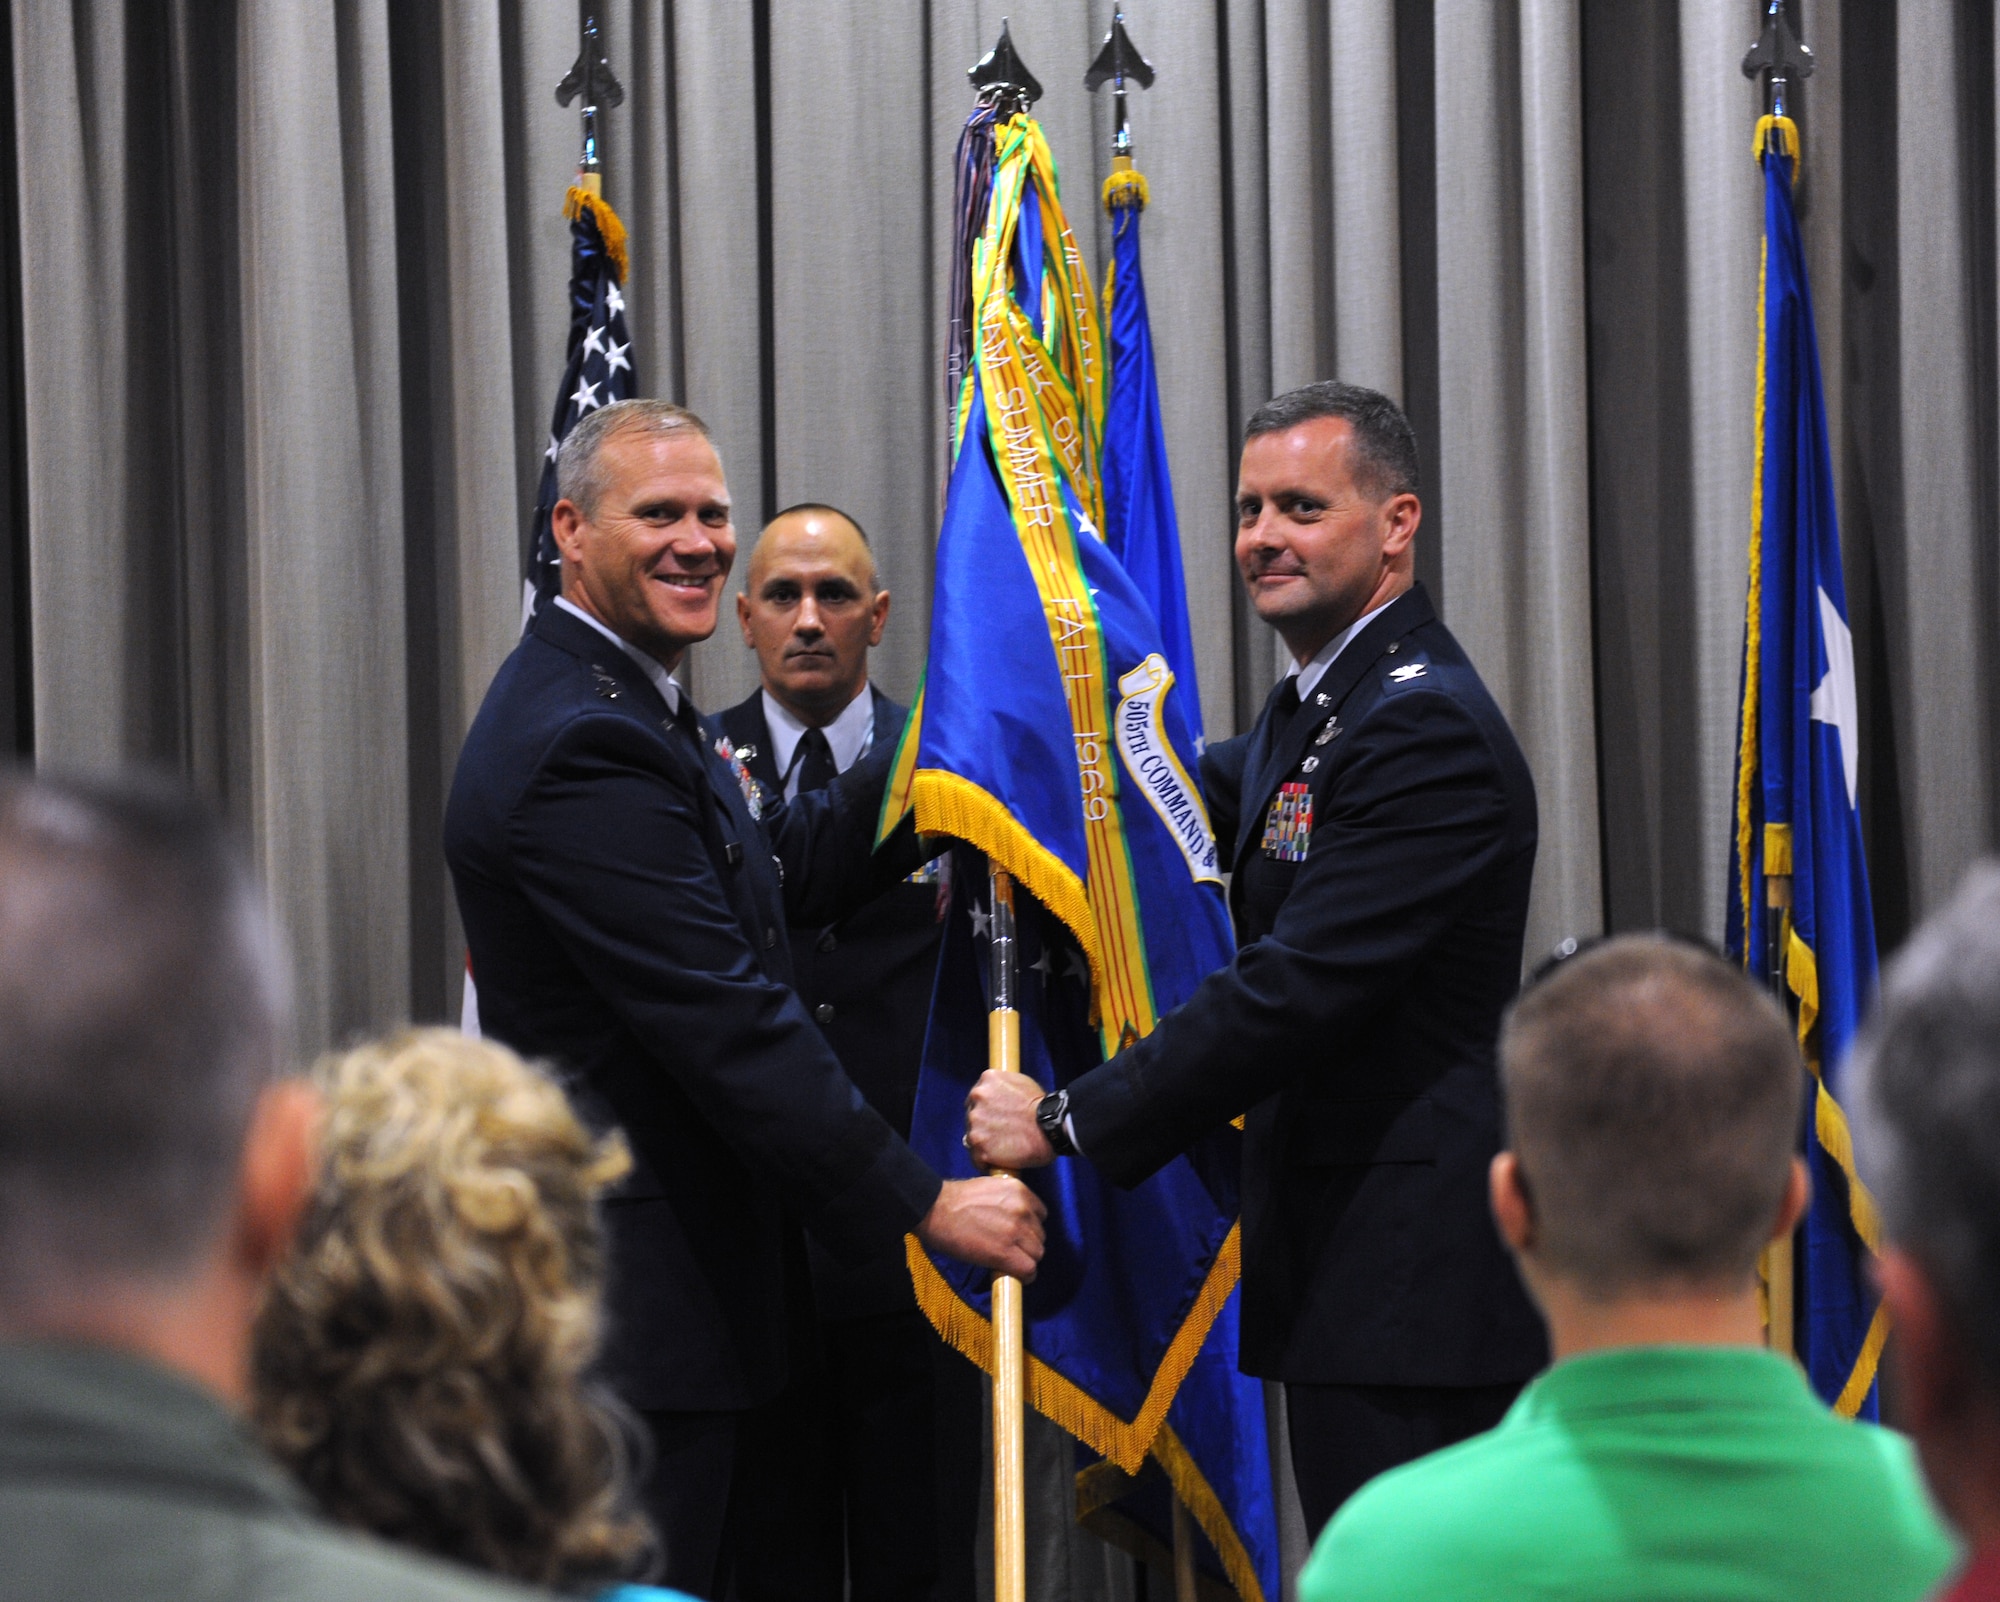 Col. Daniel J. Orcutt, right, incoming commander of 505th Command and Control Wing, accepts the 505th CCW guidon and control of the unit from Maj. Gen. Jeffery Lofgren, commander of U.S. Air Force Warfare Center, during a change of command ceremony on Hurlburt Field, Fla., July 9, 2013. “It is a humbling experience to be entrusted with the lives of such outstanding warriors as the men and women standing before us today,” Orcutt said. (U.S. Air Force photo by Senior Airman Kentavist P. Brackin)